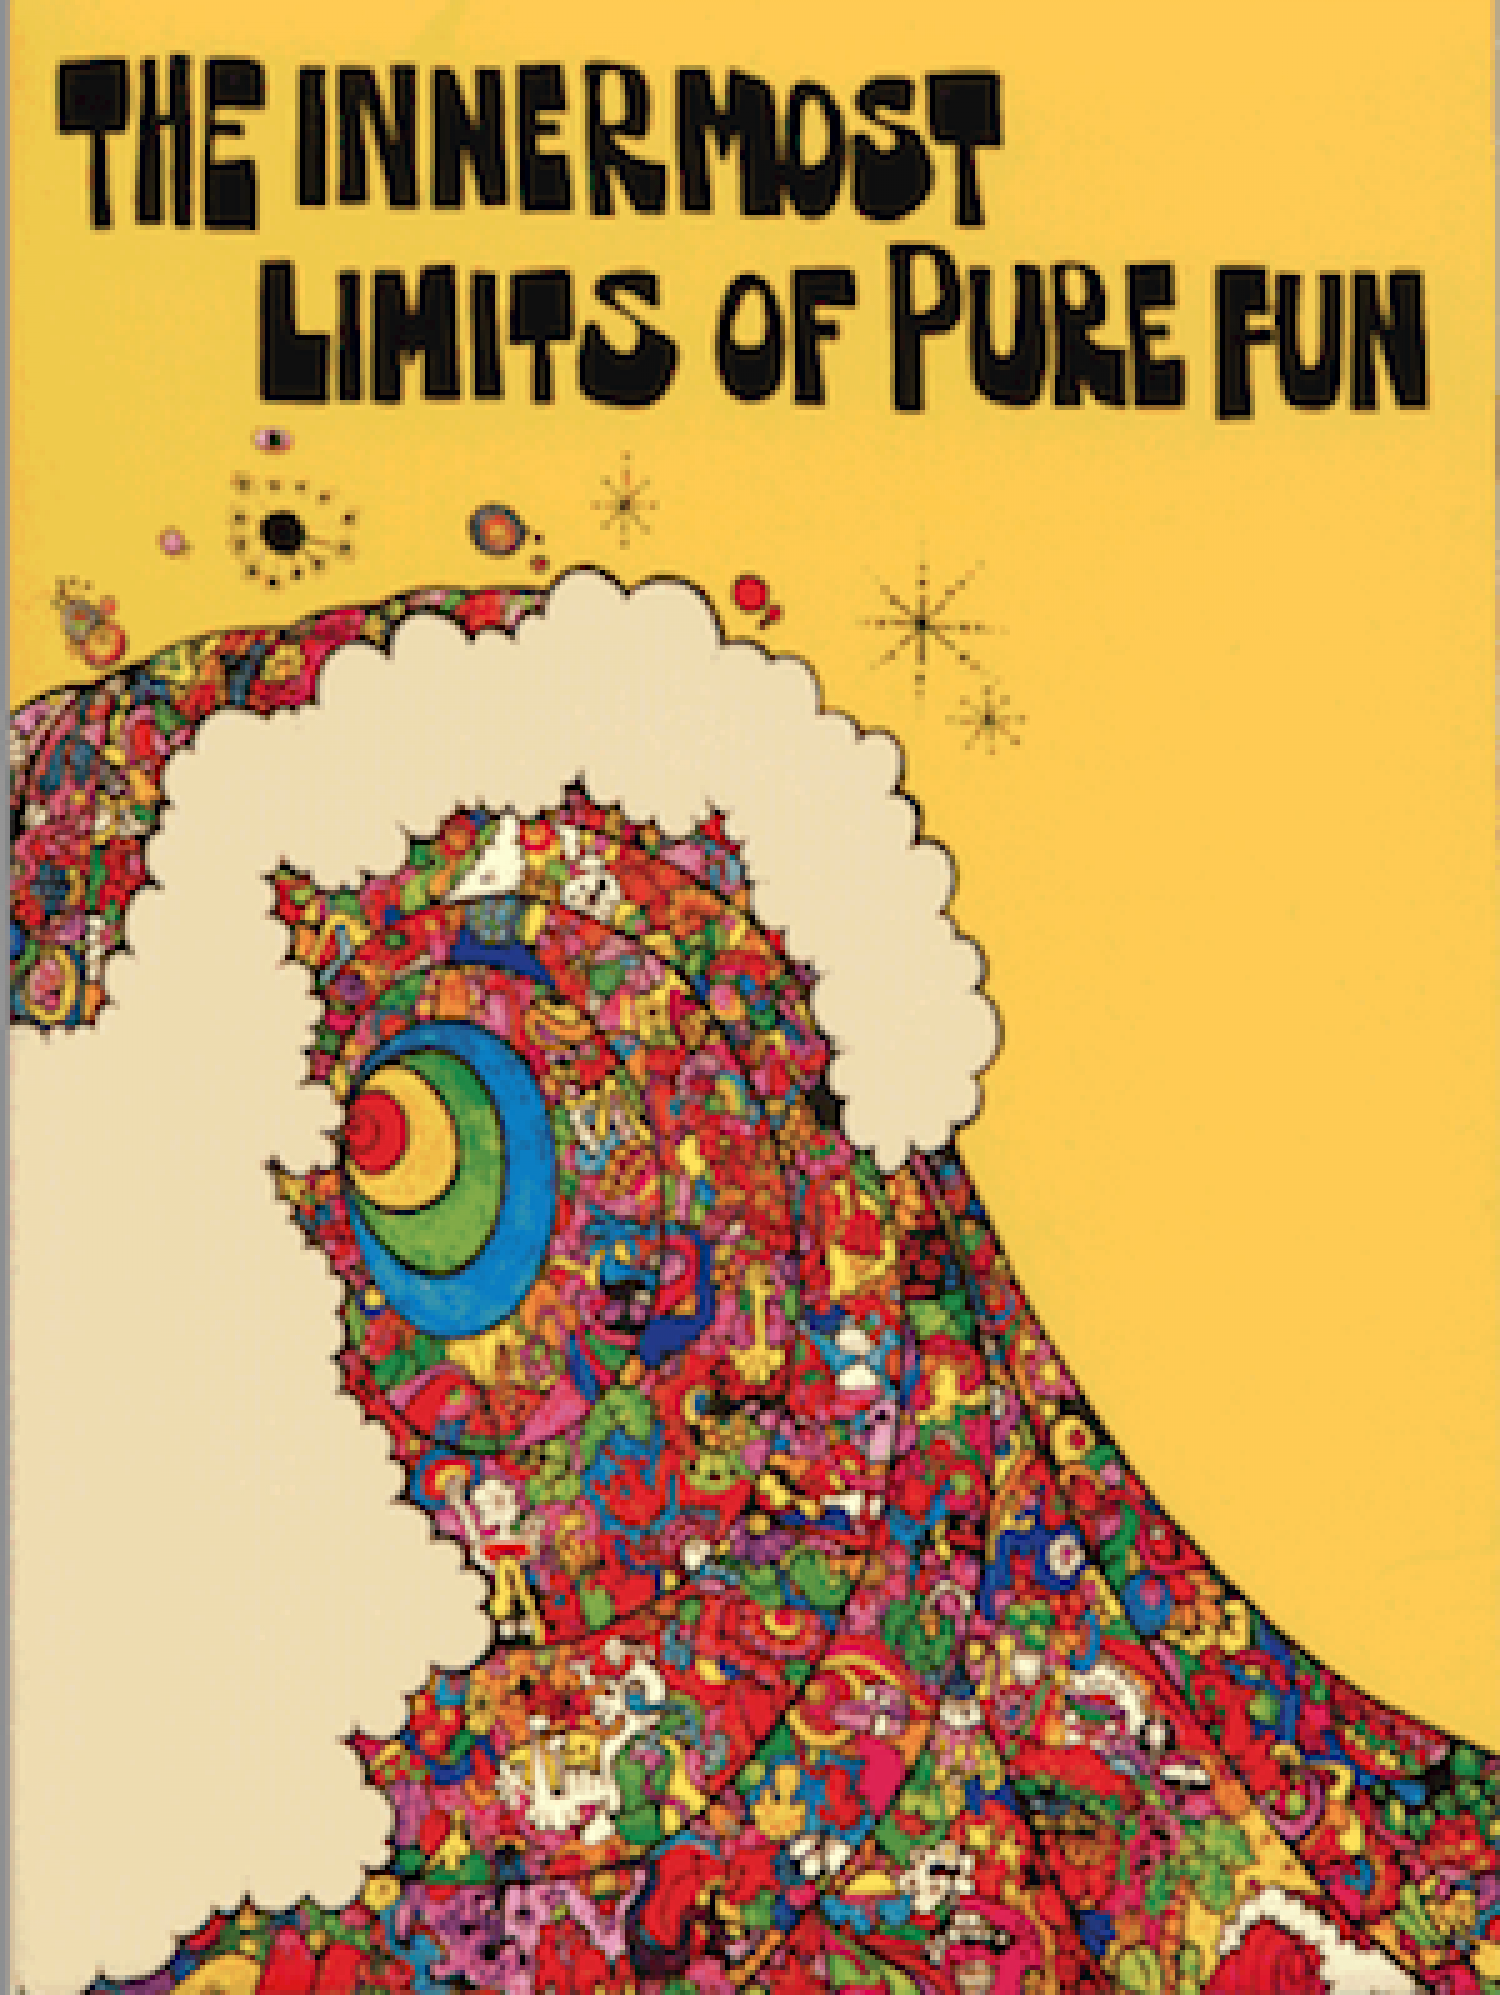 THE INNERMOST LINITS OF PURE FUN